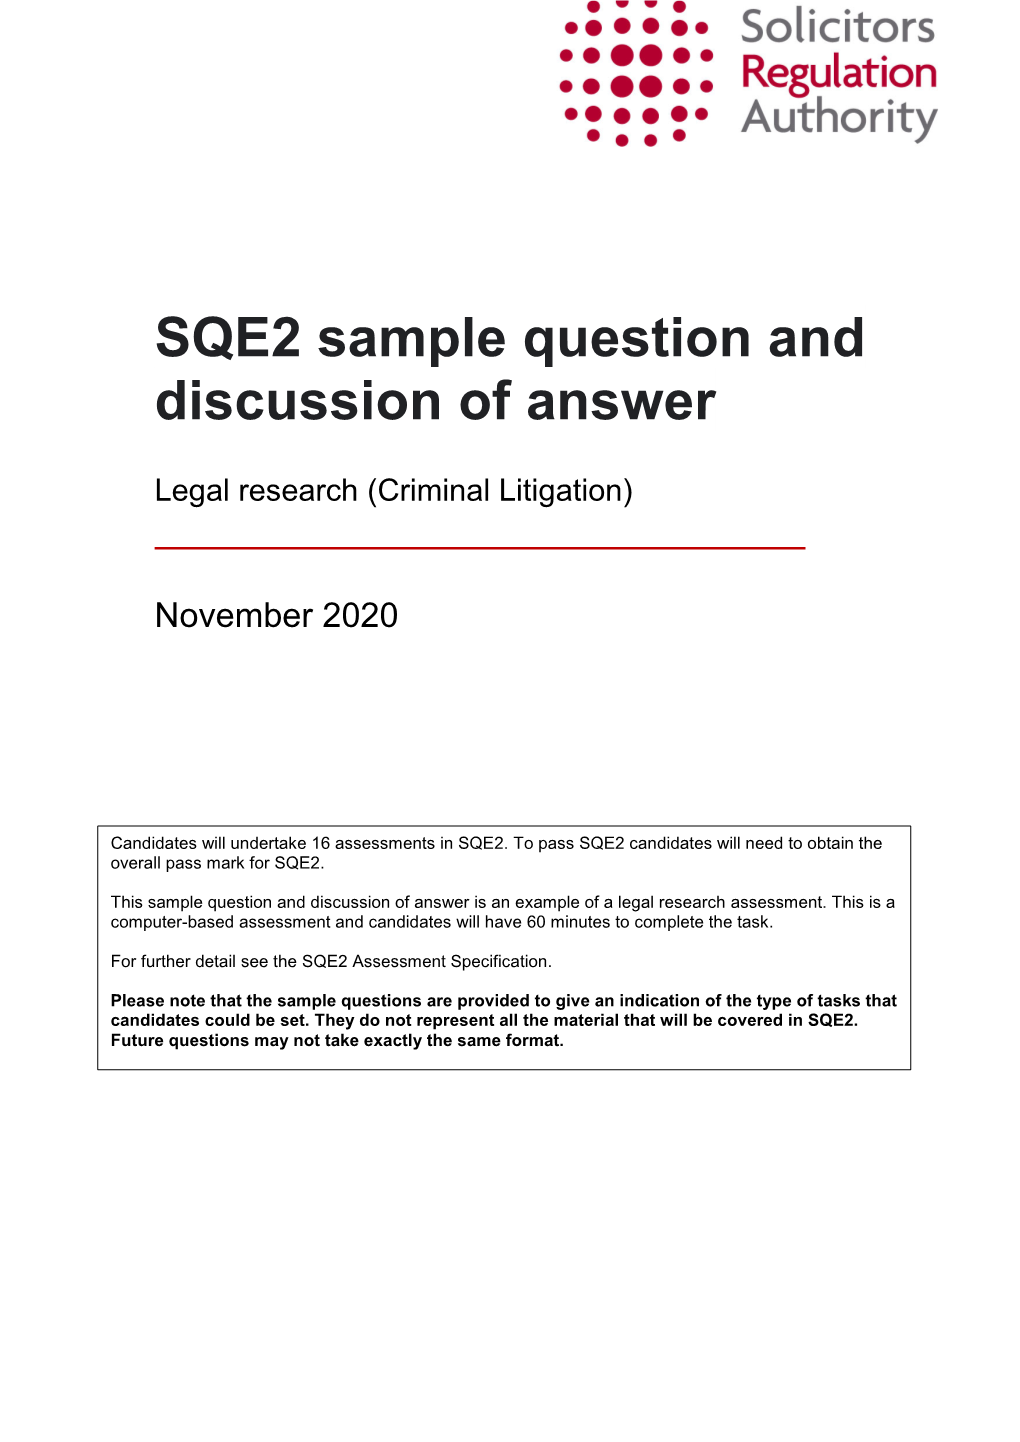 SQE2 Sample Question and Discussion of Answer